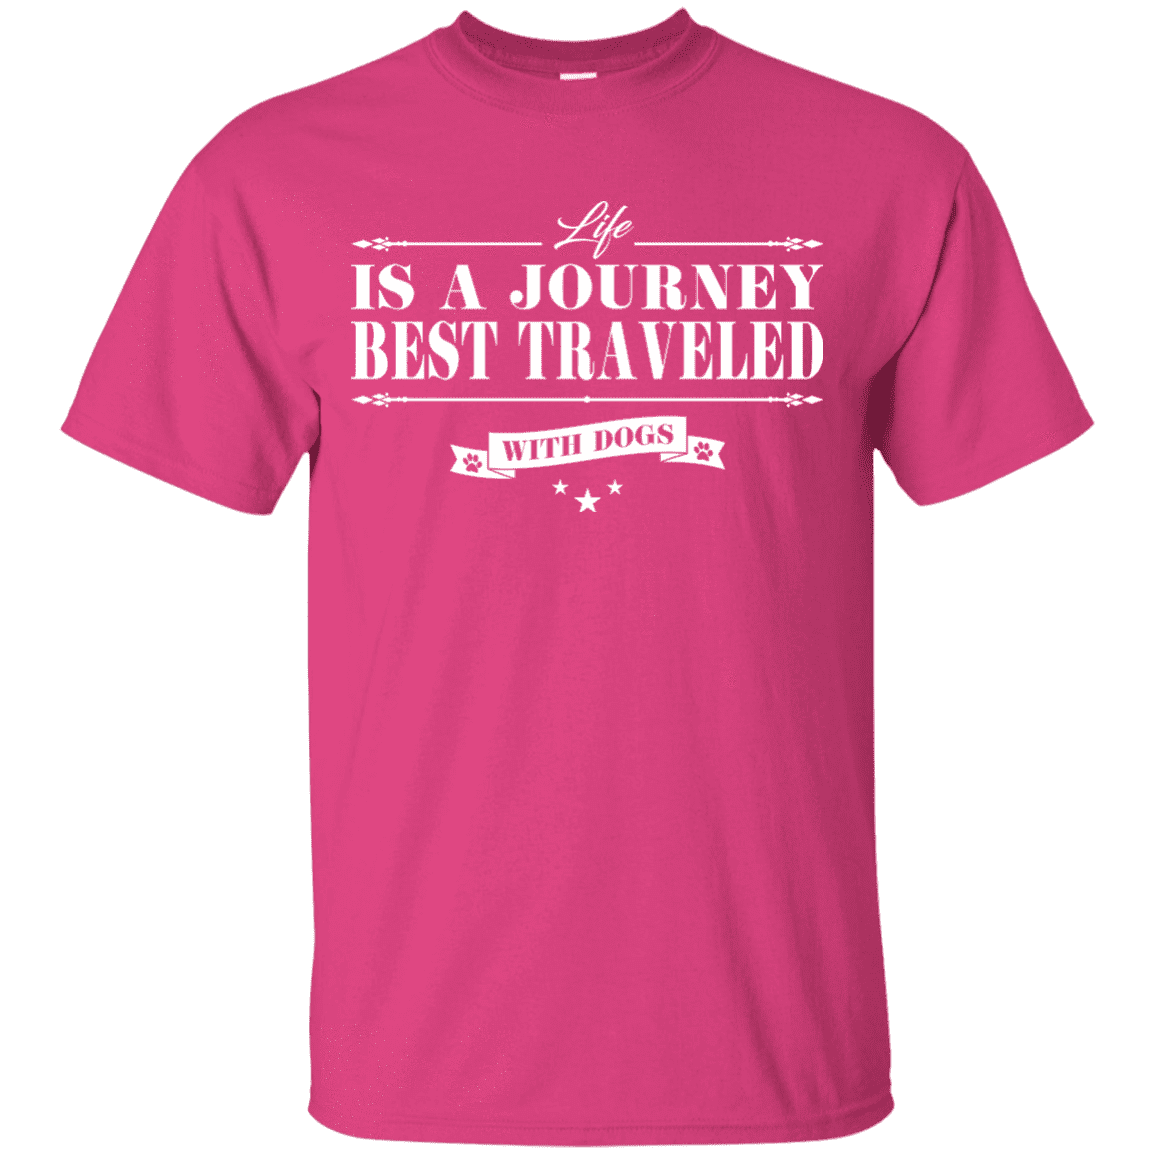 Life Is a Journey Best Travelled With Dogs - T Shirt.